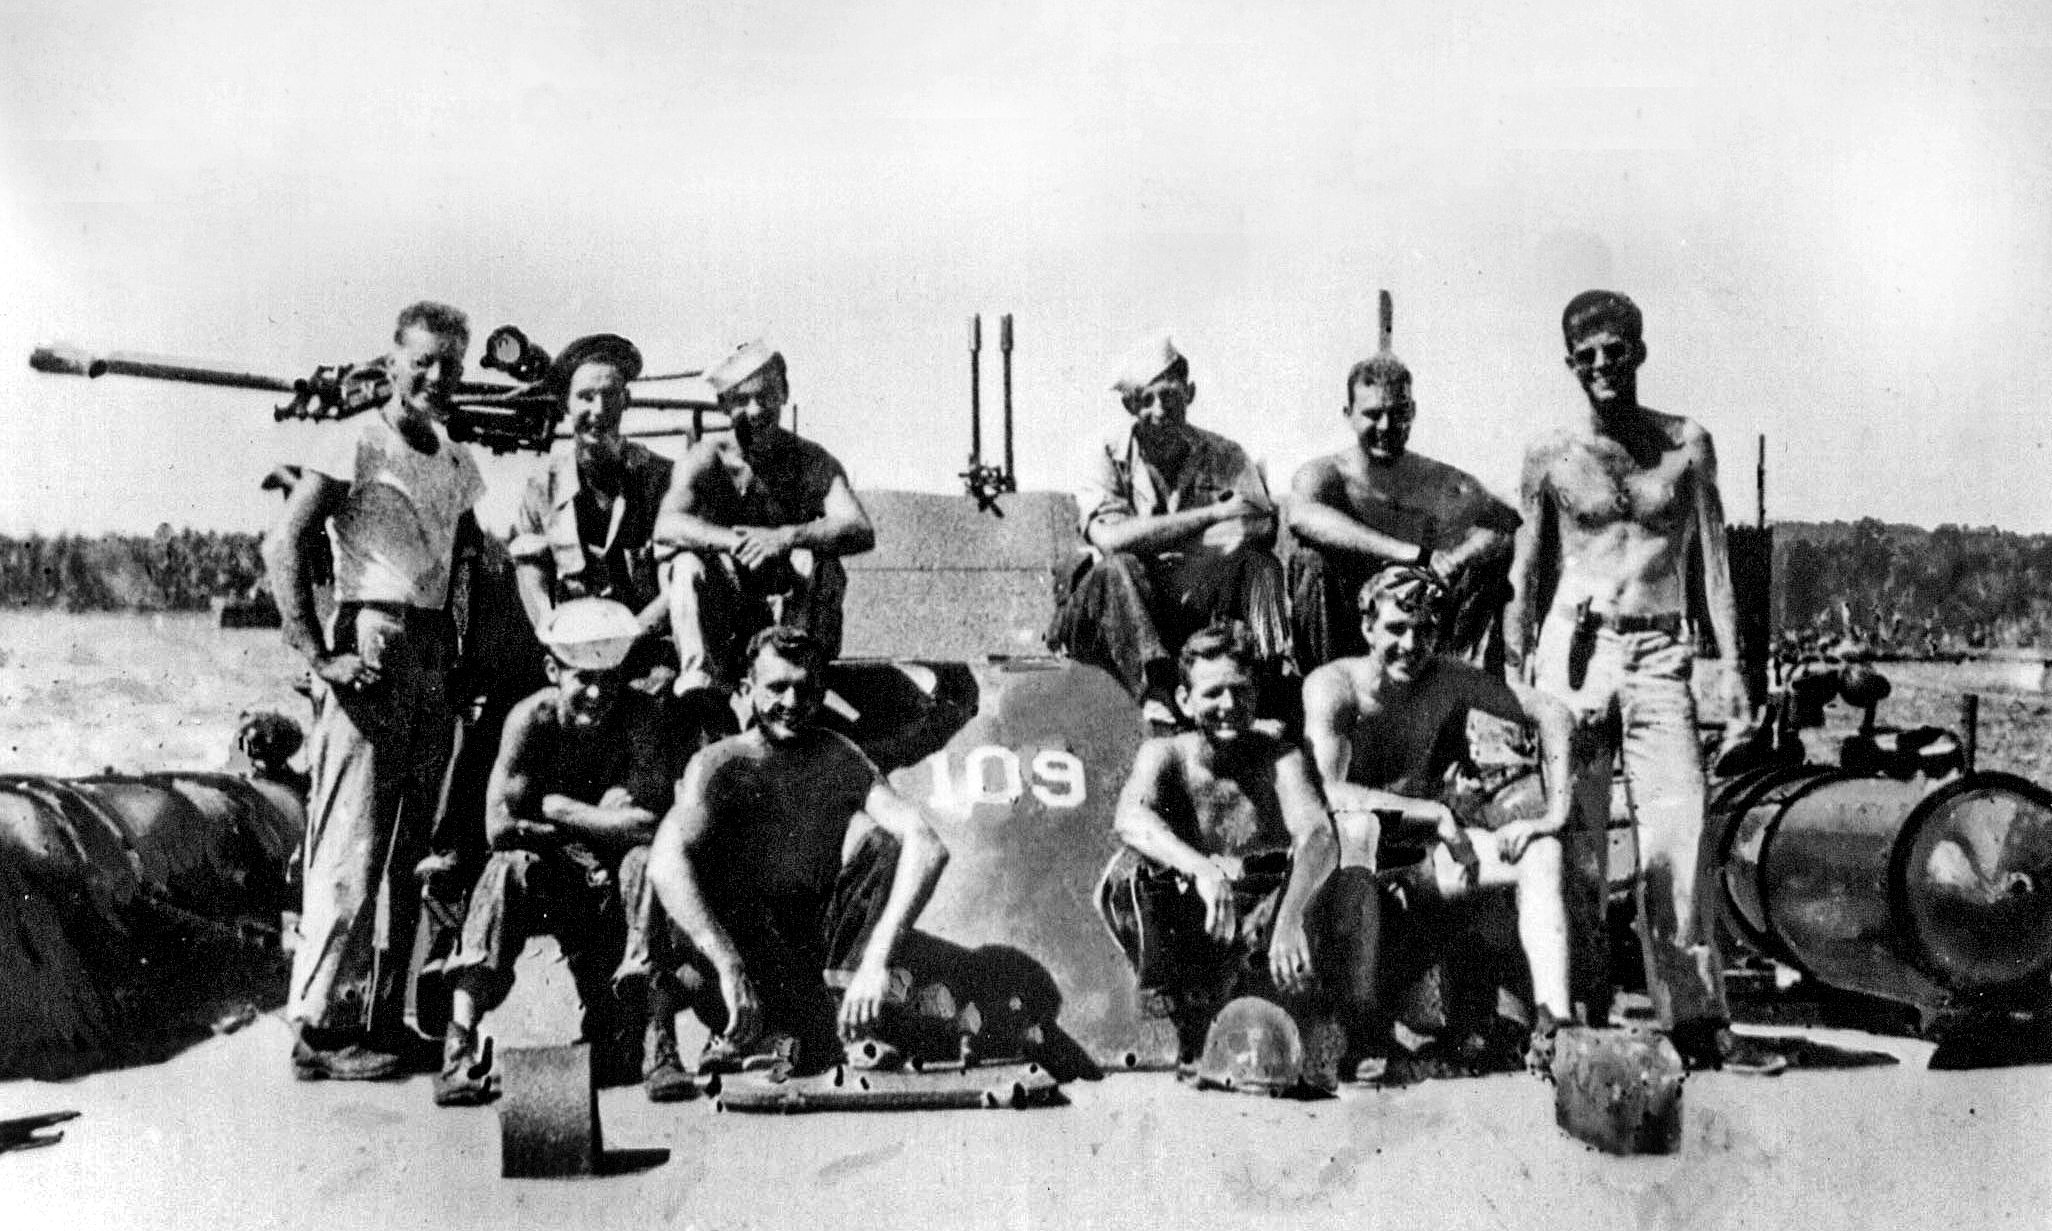 Posing with crewmen of the PT-109 at a South Pacific naval base, Lieutenant John F. Kennedy smiles at far right. This photo was taken in 1943 not long before the fateful encounter with the Japanese destroyer Amagiri in Blackett Strait.